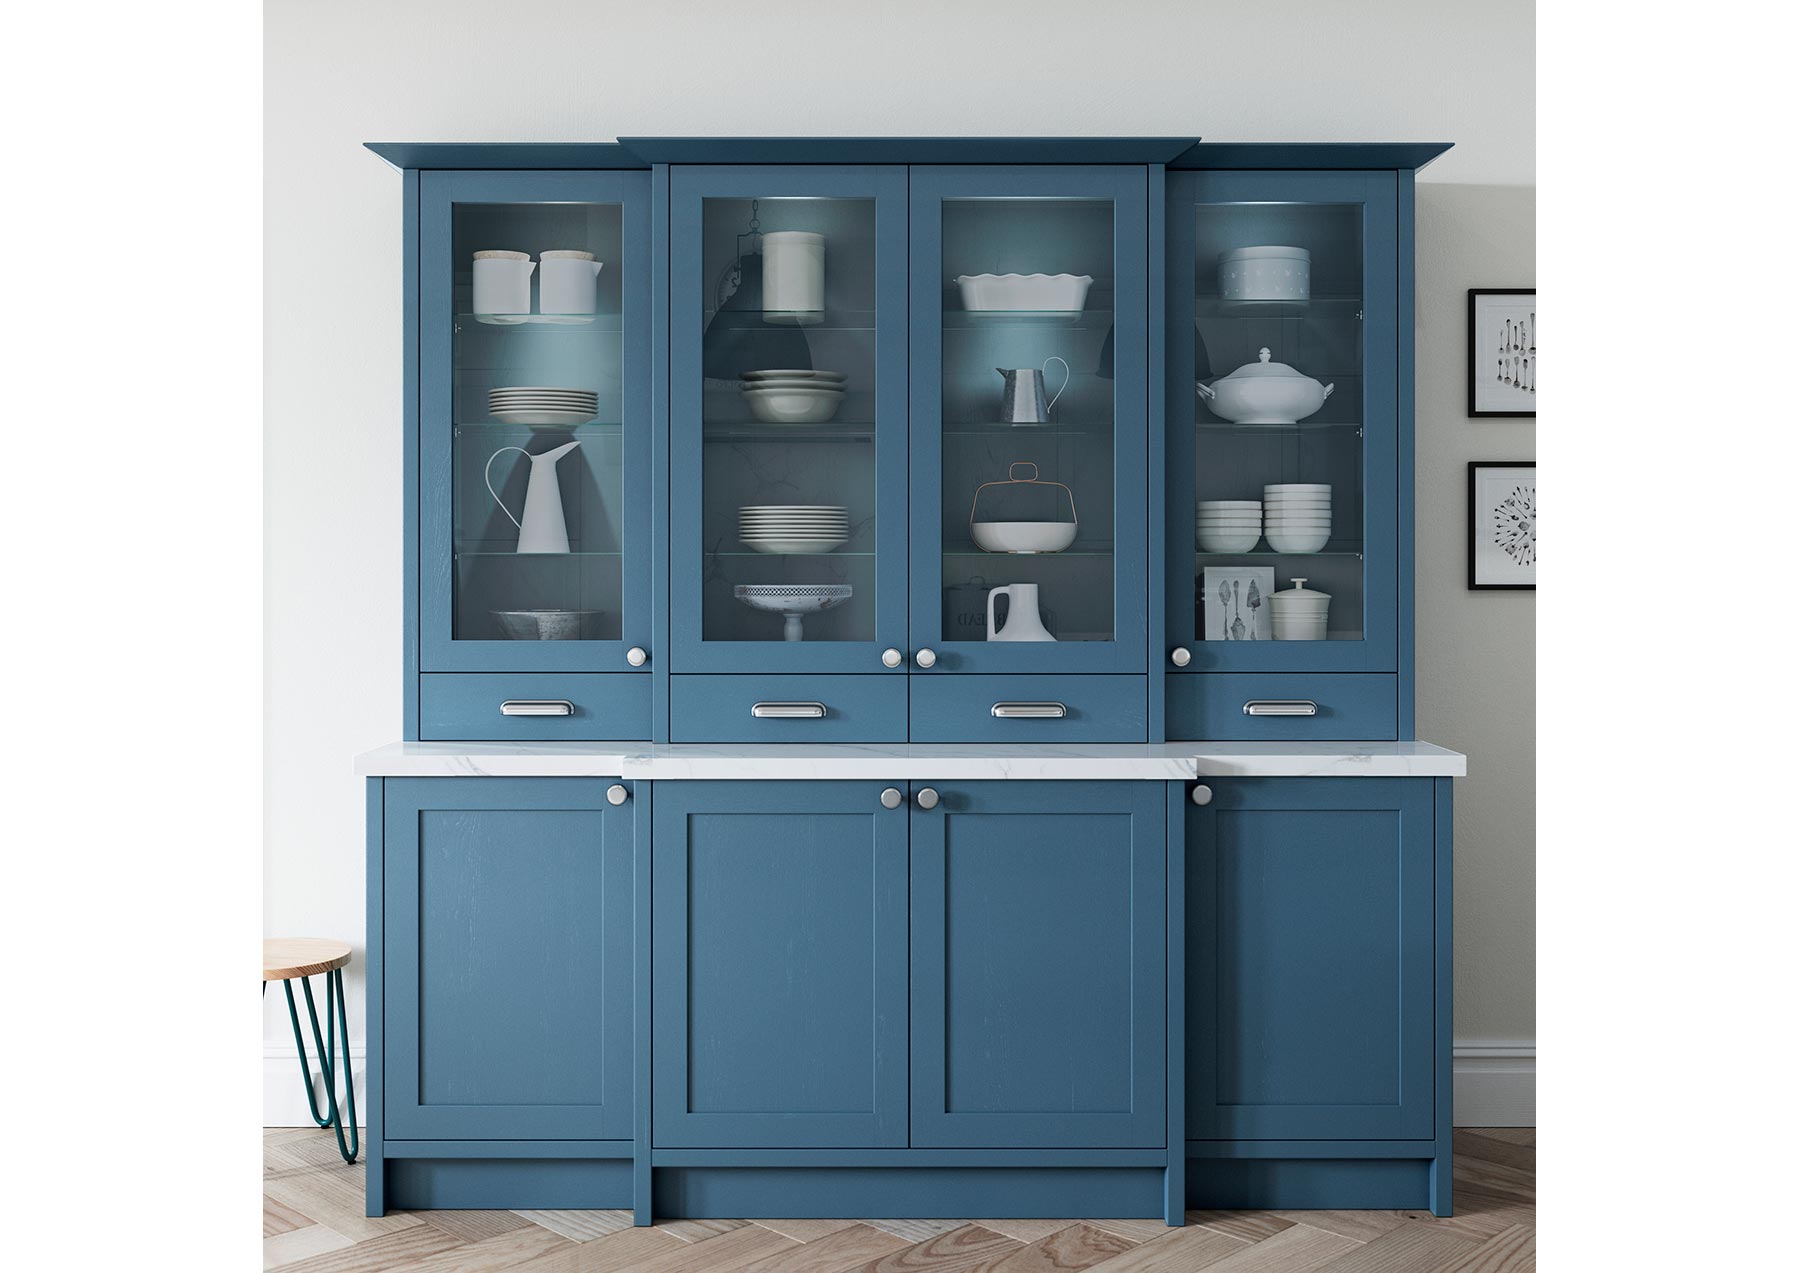 Skinny contemporary style shaker kitchen dresser painted airforce blue